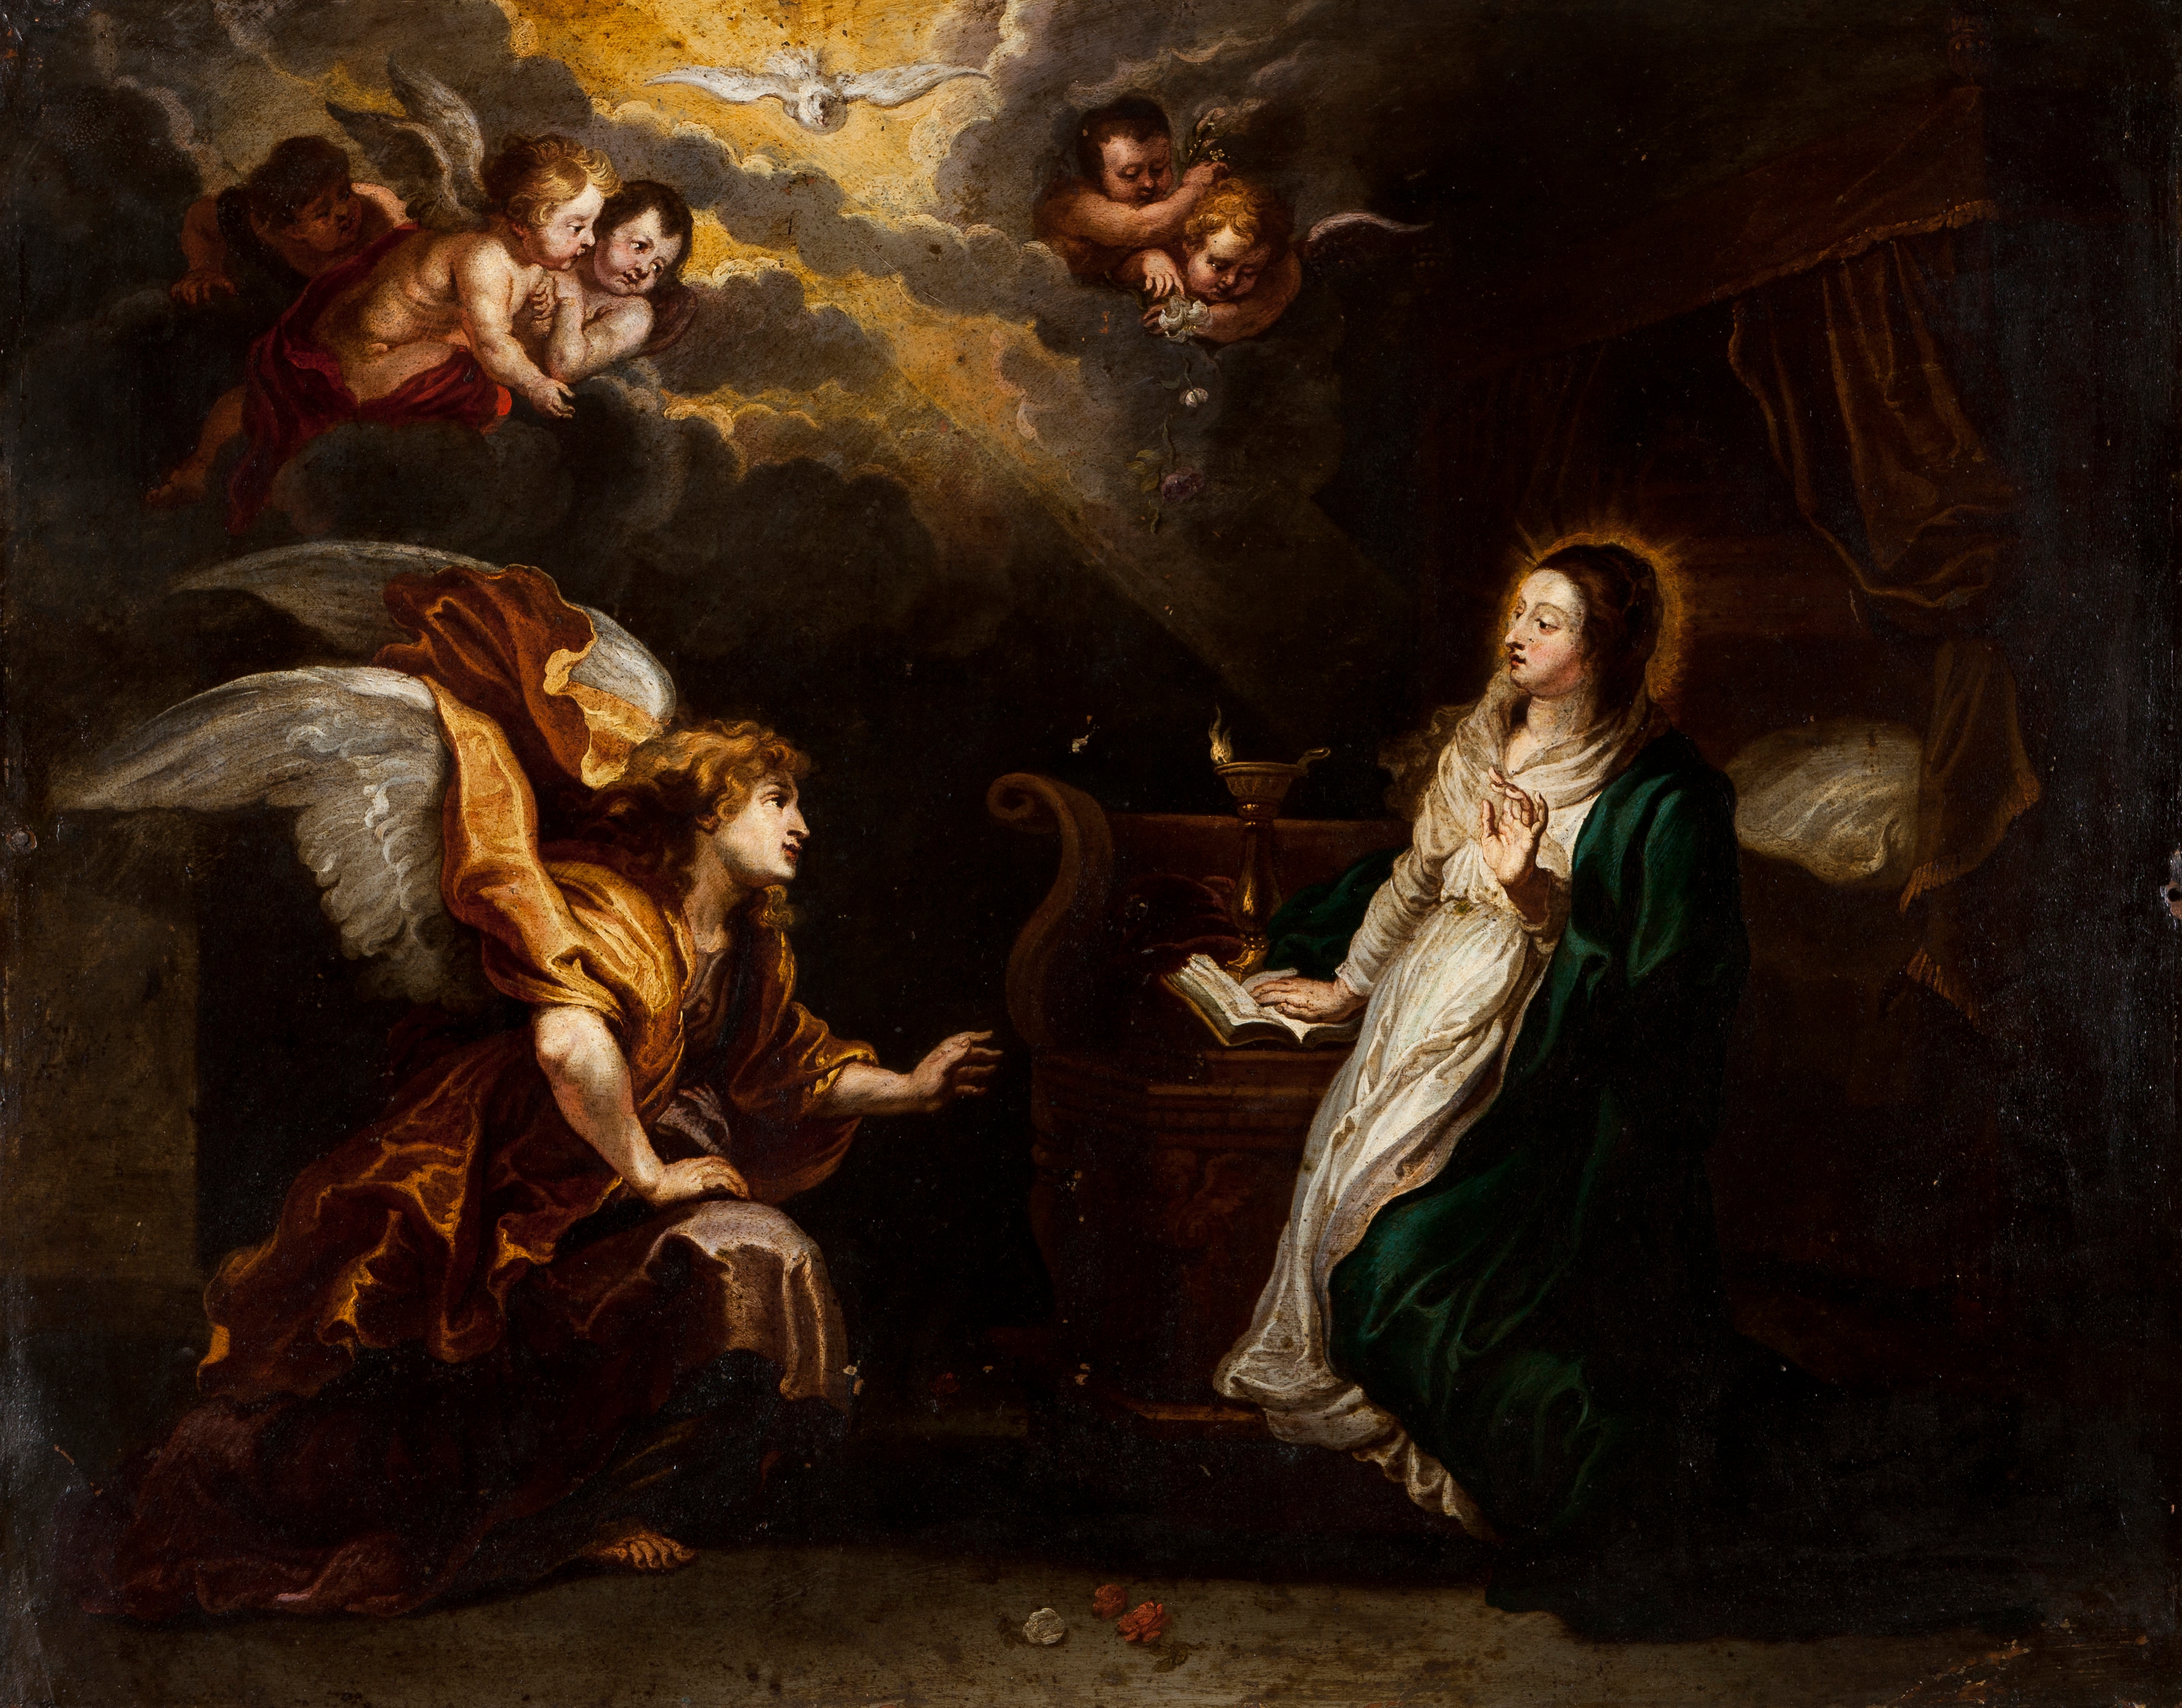 Artwork by Peter Paul Rubens, The Annunciation, Made of Oil on copper